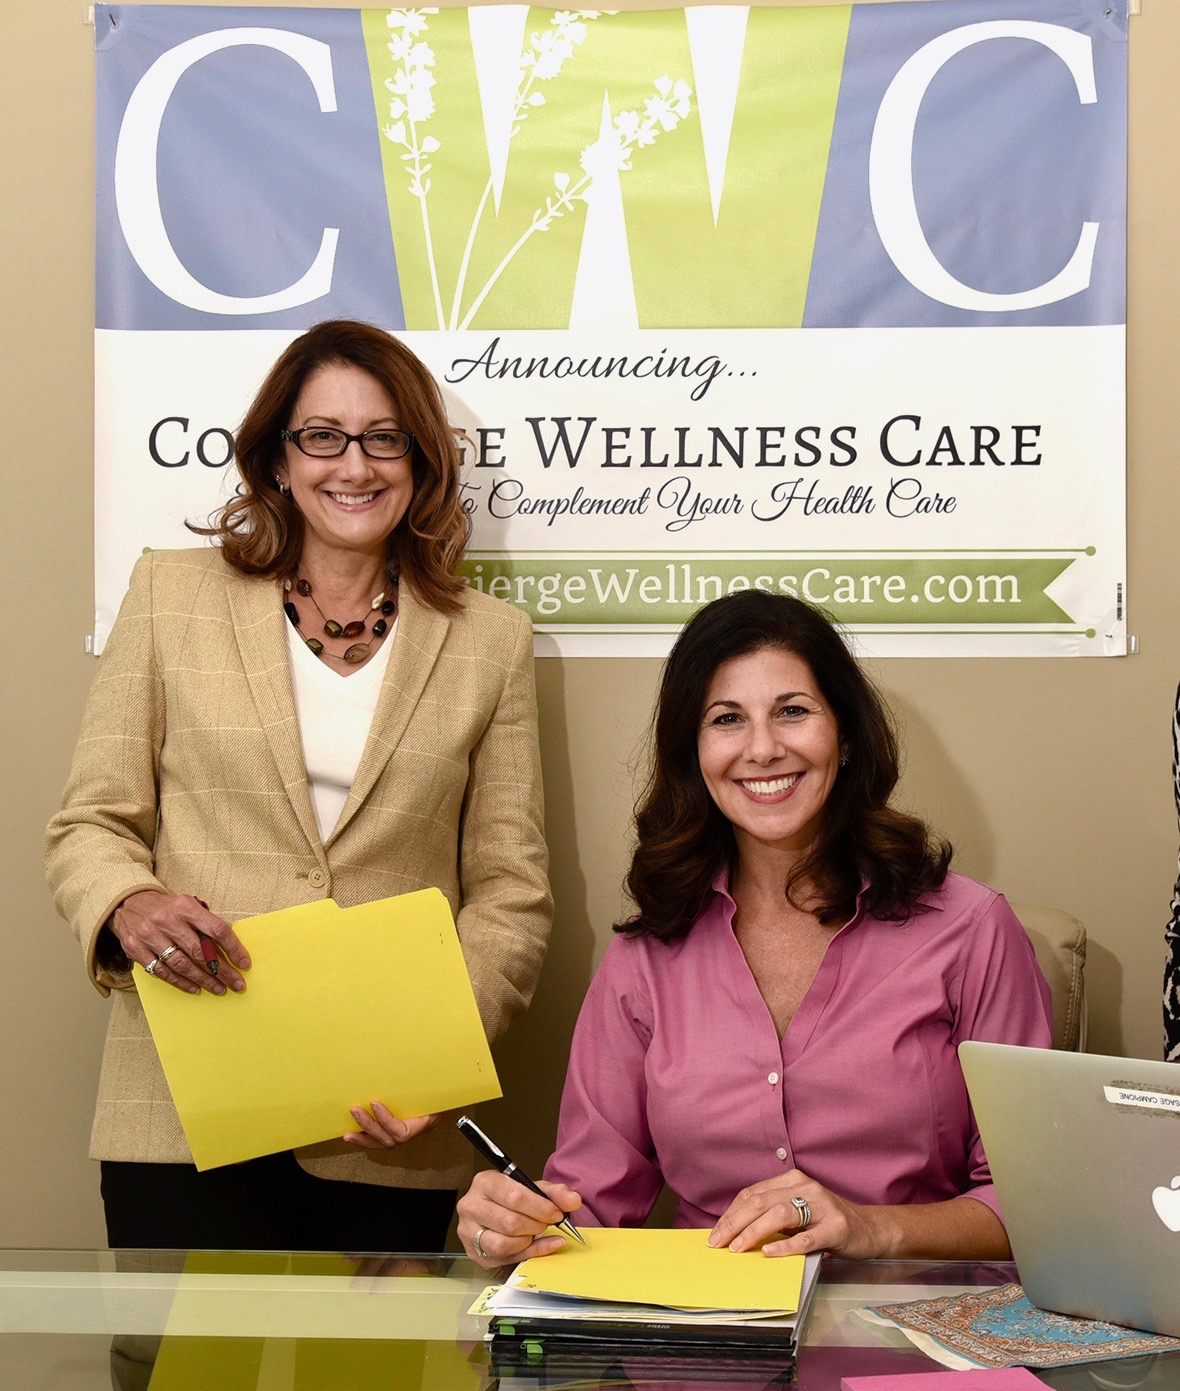 Is Concierge Wellness Care for Me?